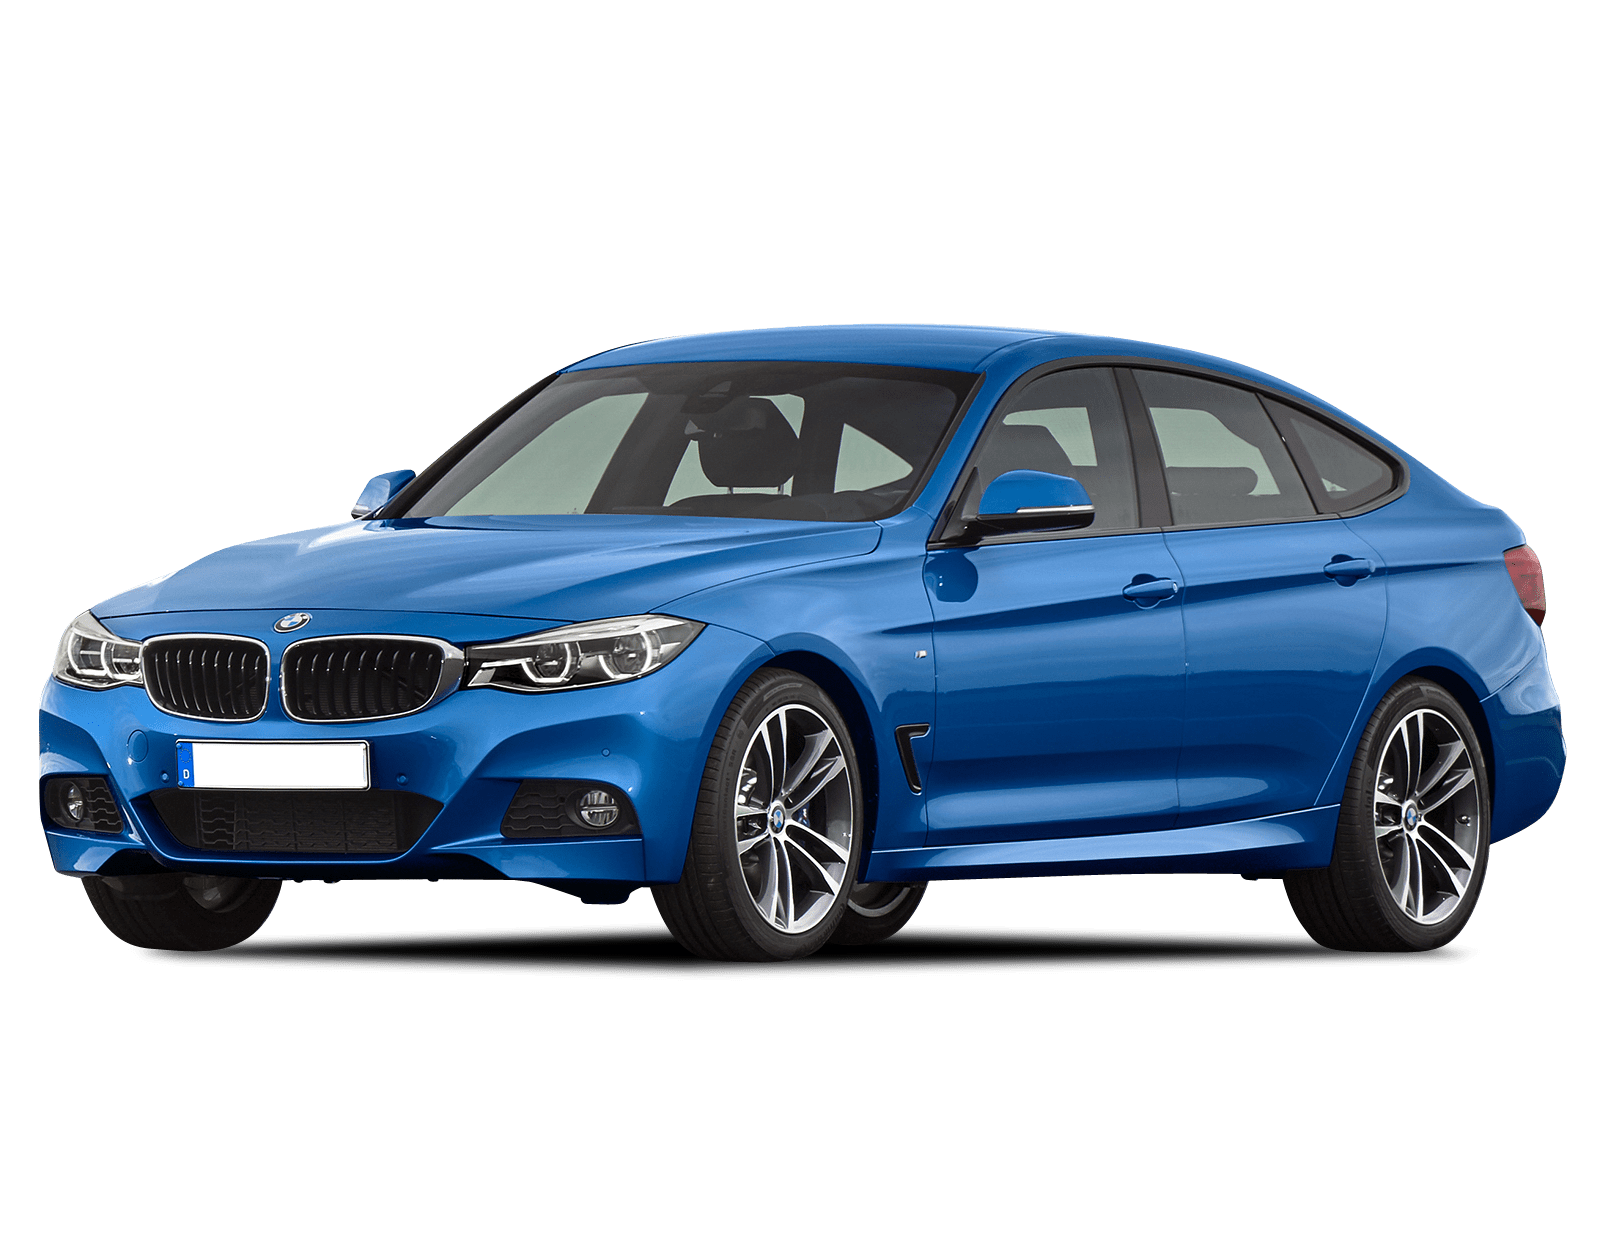 The BMW 325i is the E30 3 Series to get per Car and Driver